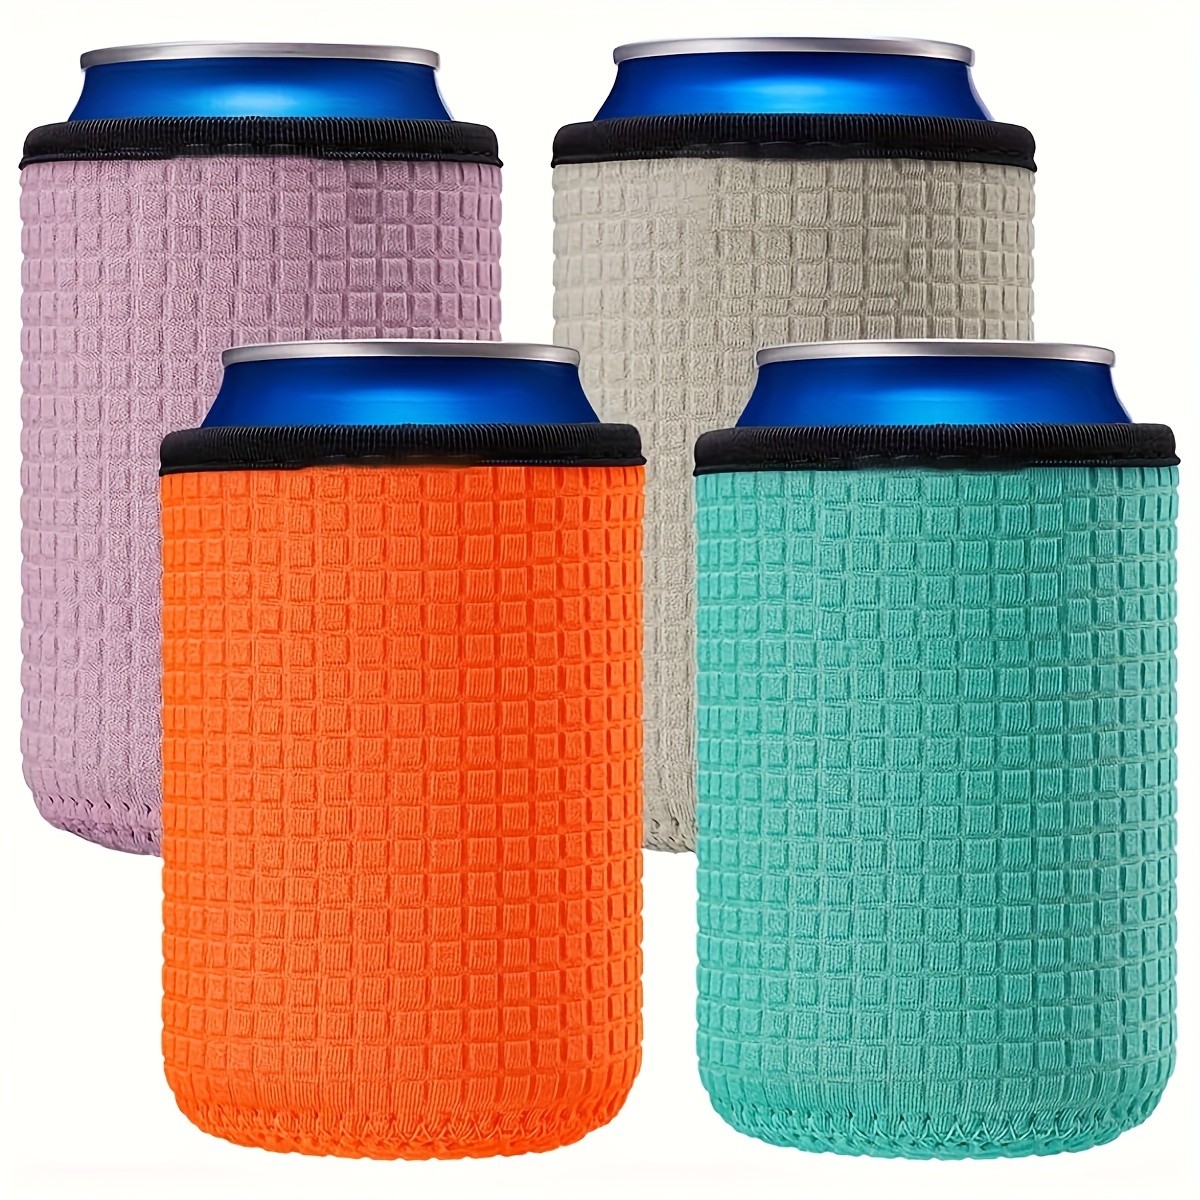 Koozie Silicone Beer Can Cover Hide A Beer Tall Boy 16oz/1 Pint (2 Pack)